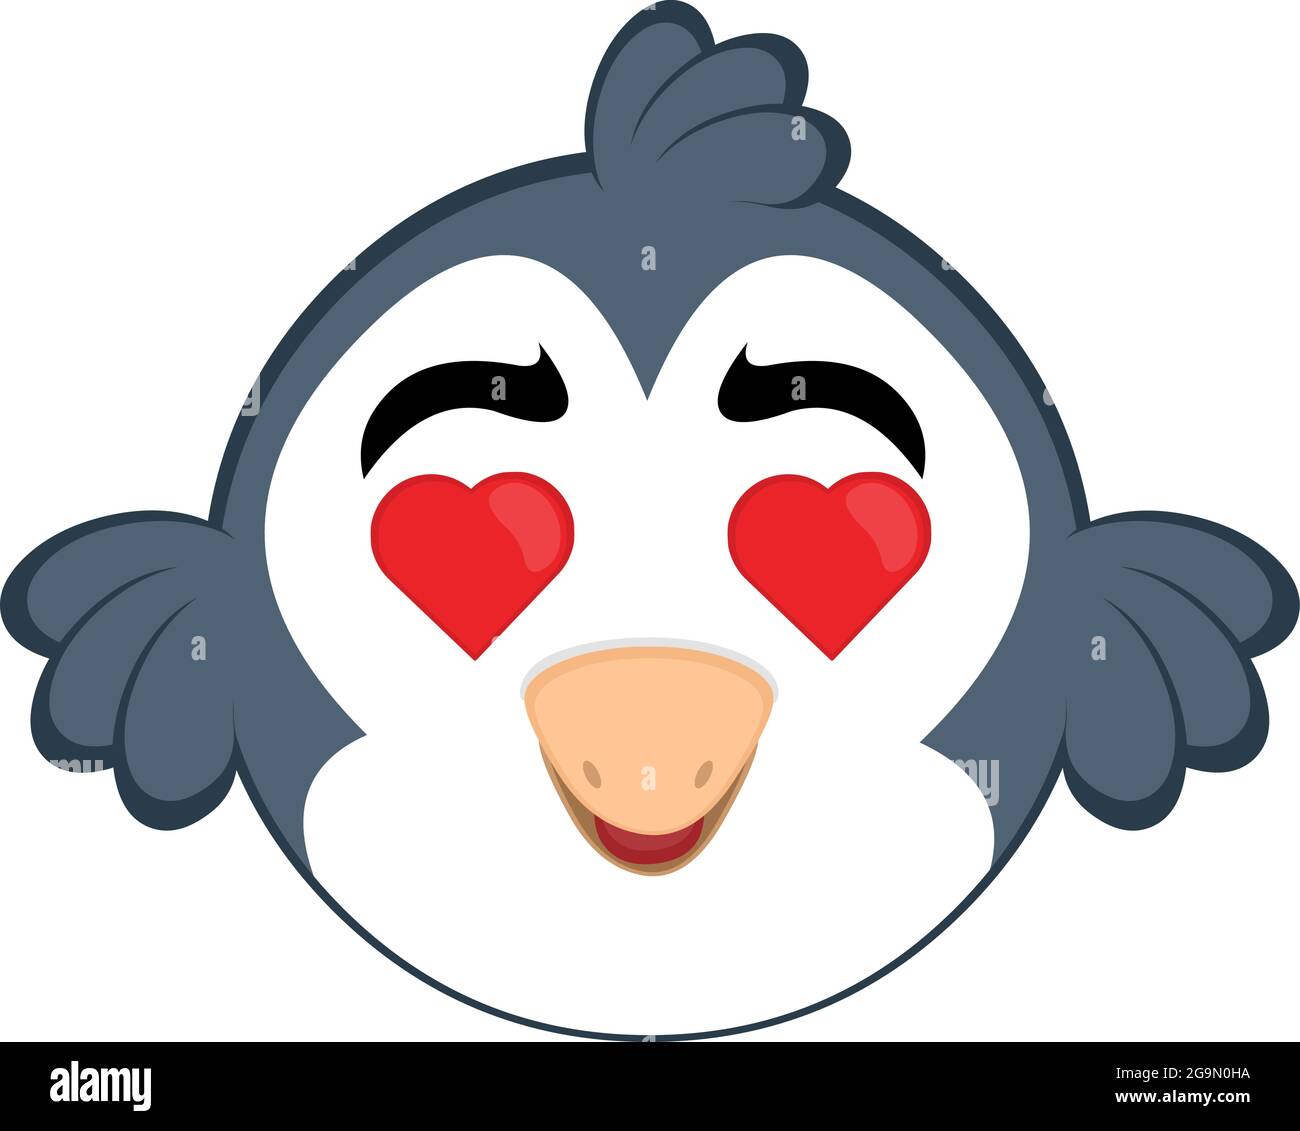 Vector emoticon illustration of a cartoon bird with eyes in the shape of hearts Stock Vector